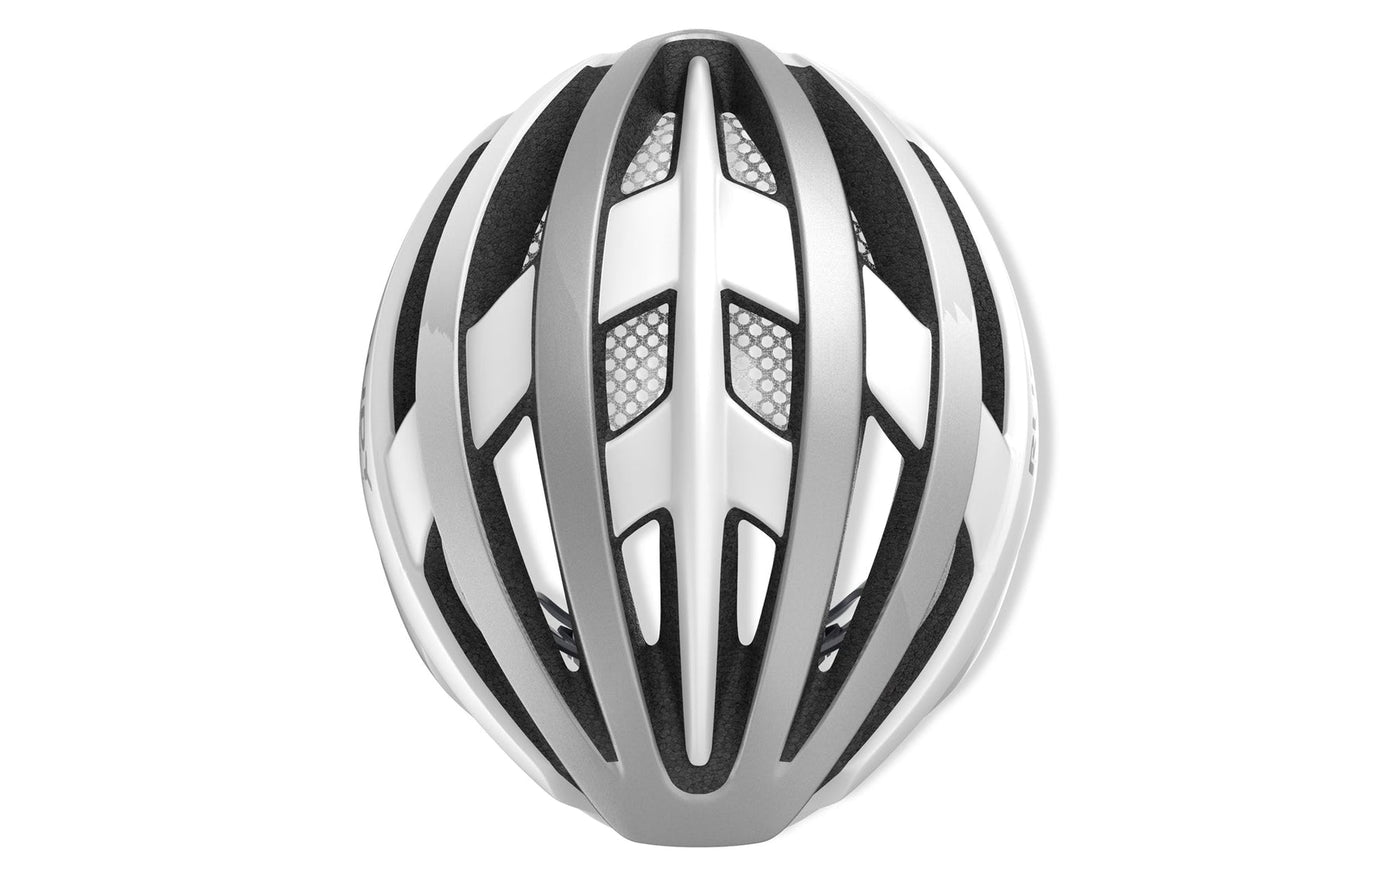 Rudy Project Venger Road Cycling Helmet (White/Silver-Matte)